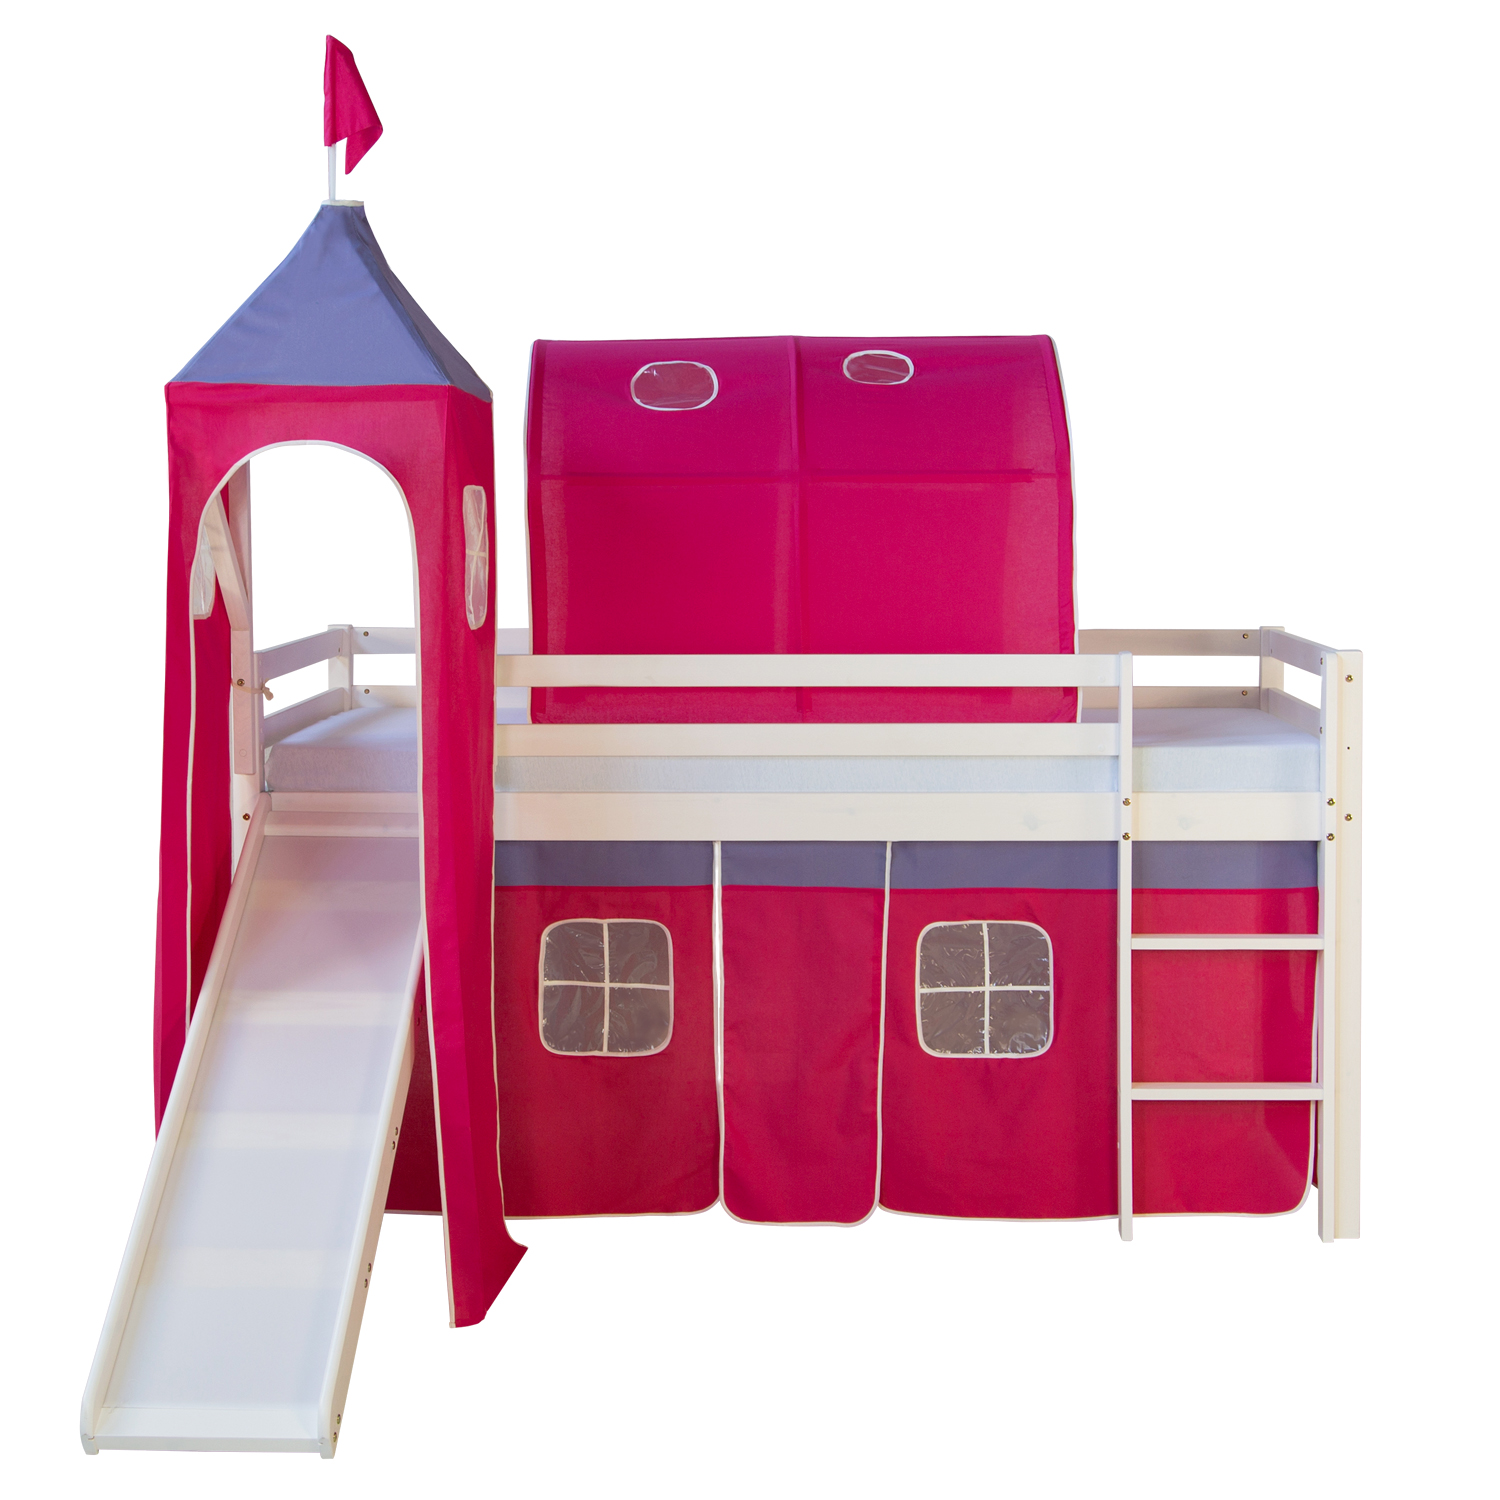 Tunnel for Loft Beds 5 Colours Bed Tent Bed Roof Play Tunnel Cave Cot